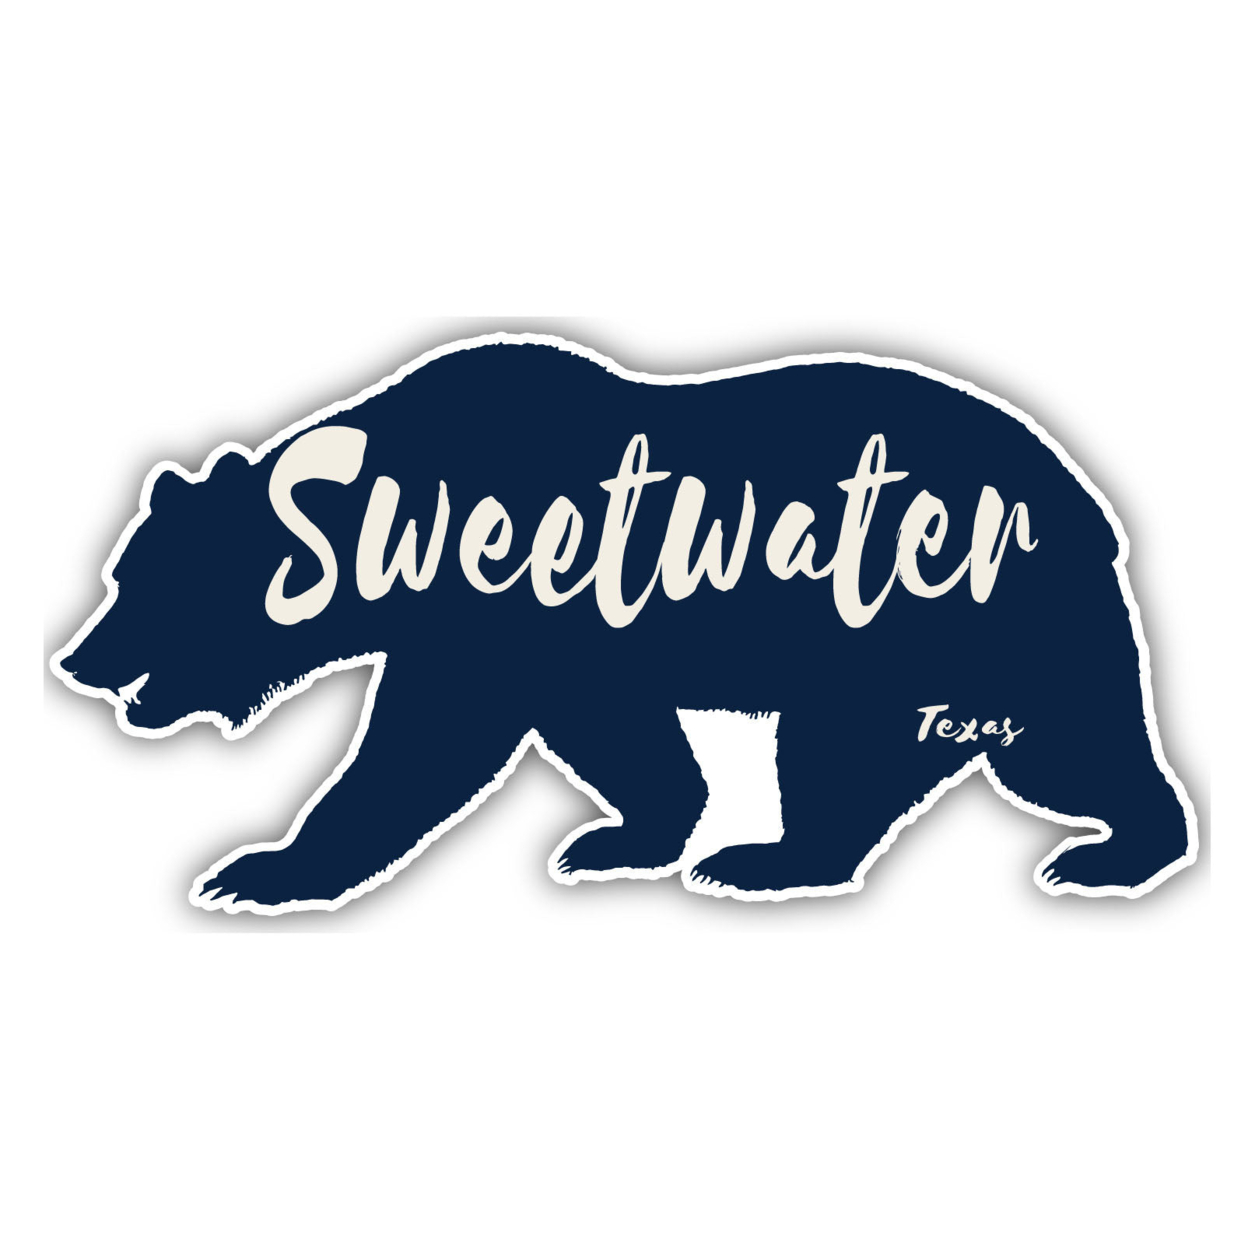 Sweetwater Texas Souvenir Decorative Stickers (Choose Theme And Size) - Single Unit, 4-Inch, Bear